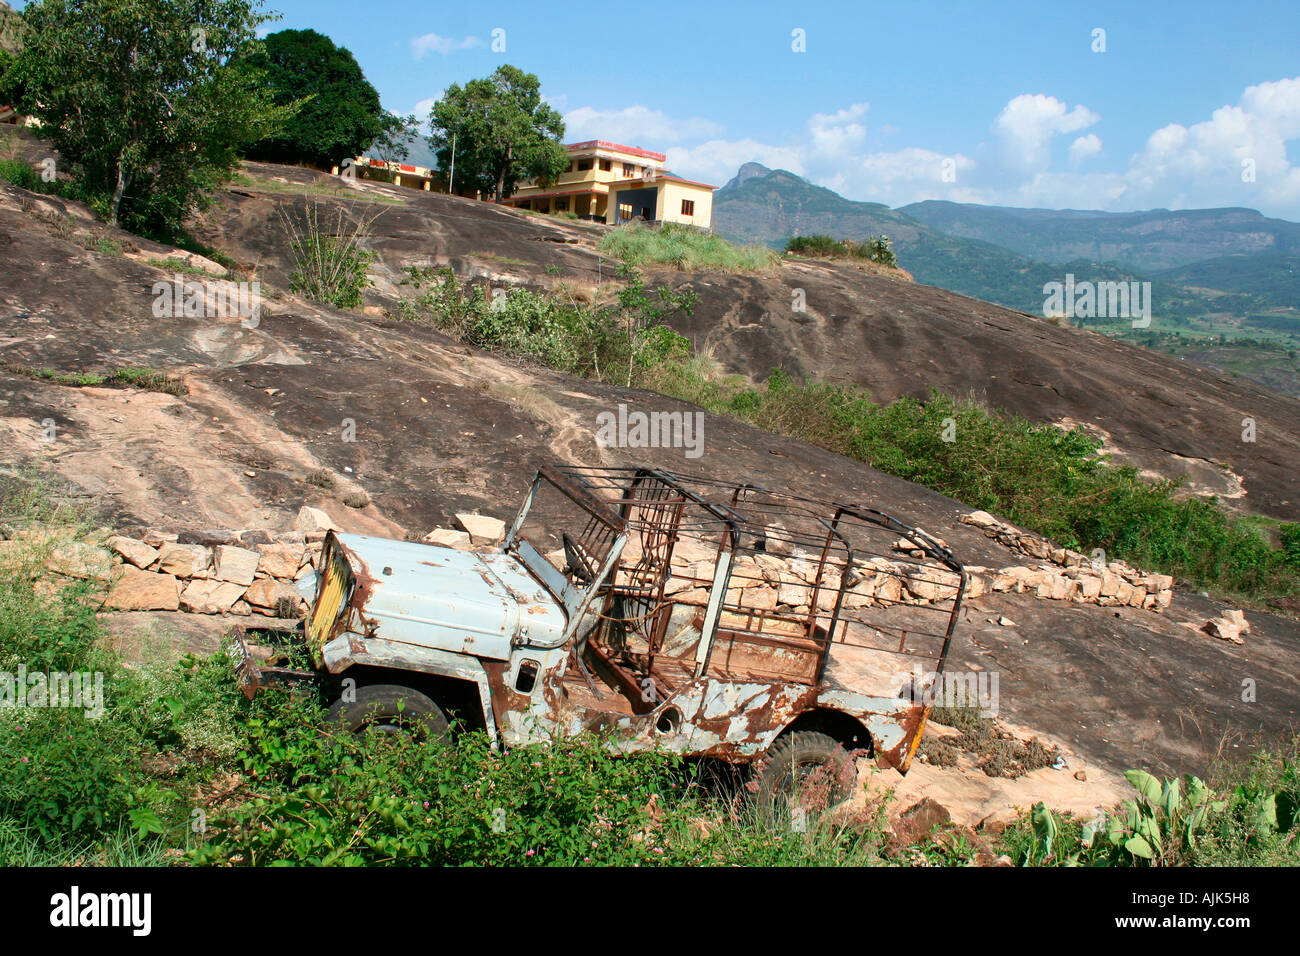 A panoramic view of a rocky landscape with an abandoned vehicle as the prime focus, Marayoor, Kerala, India Stock Photo